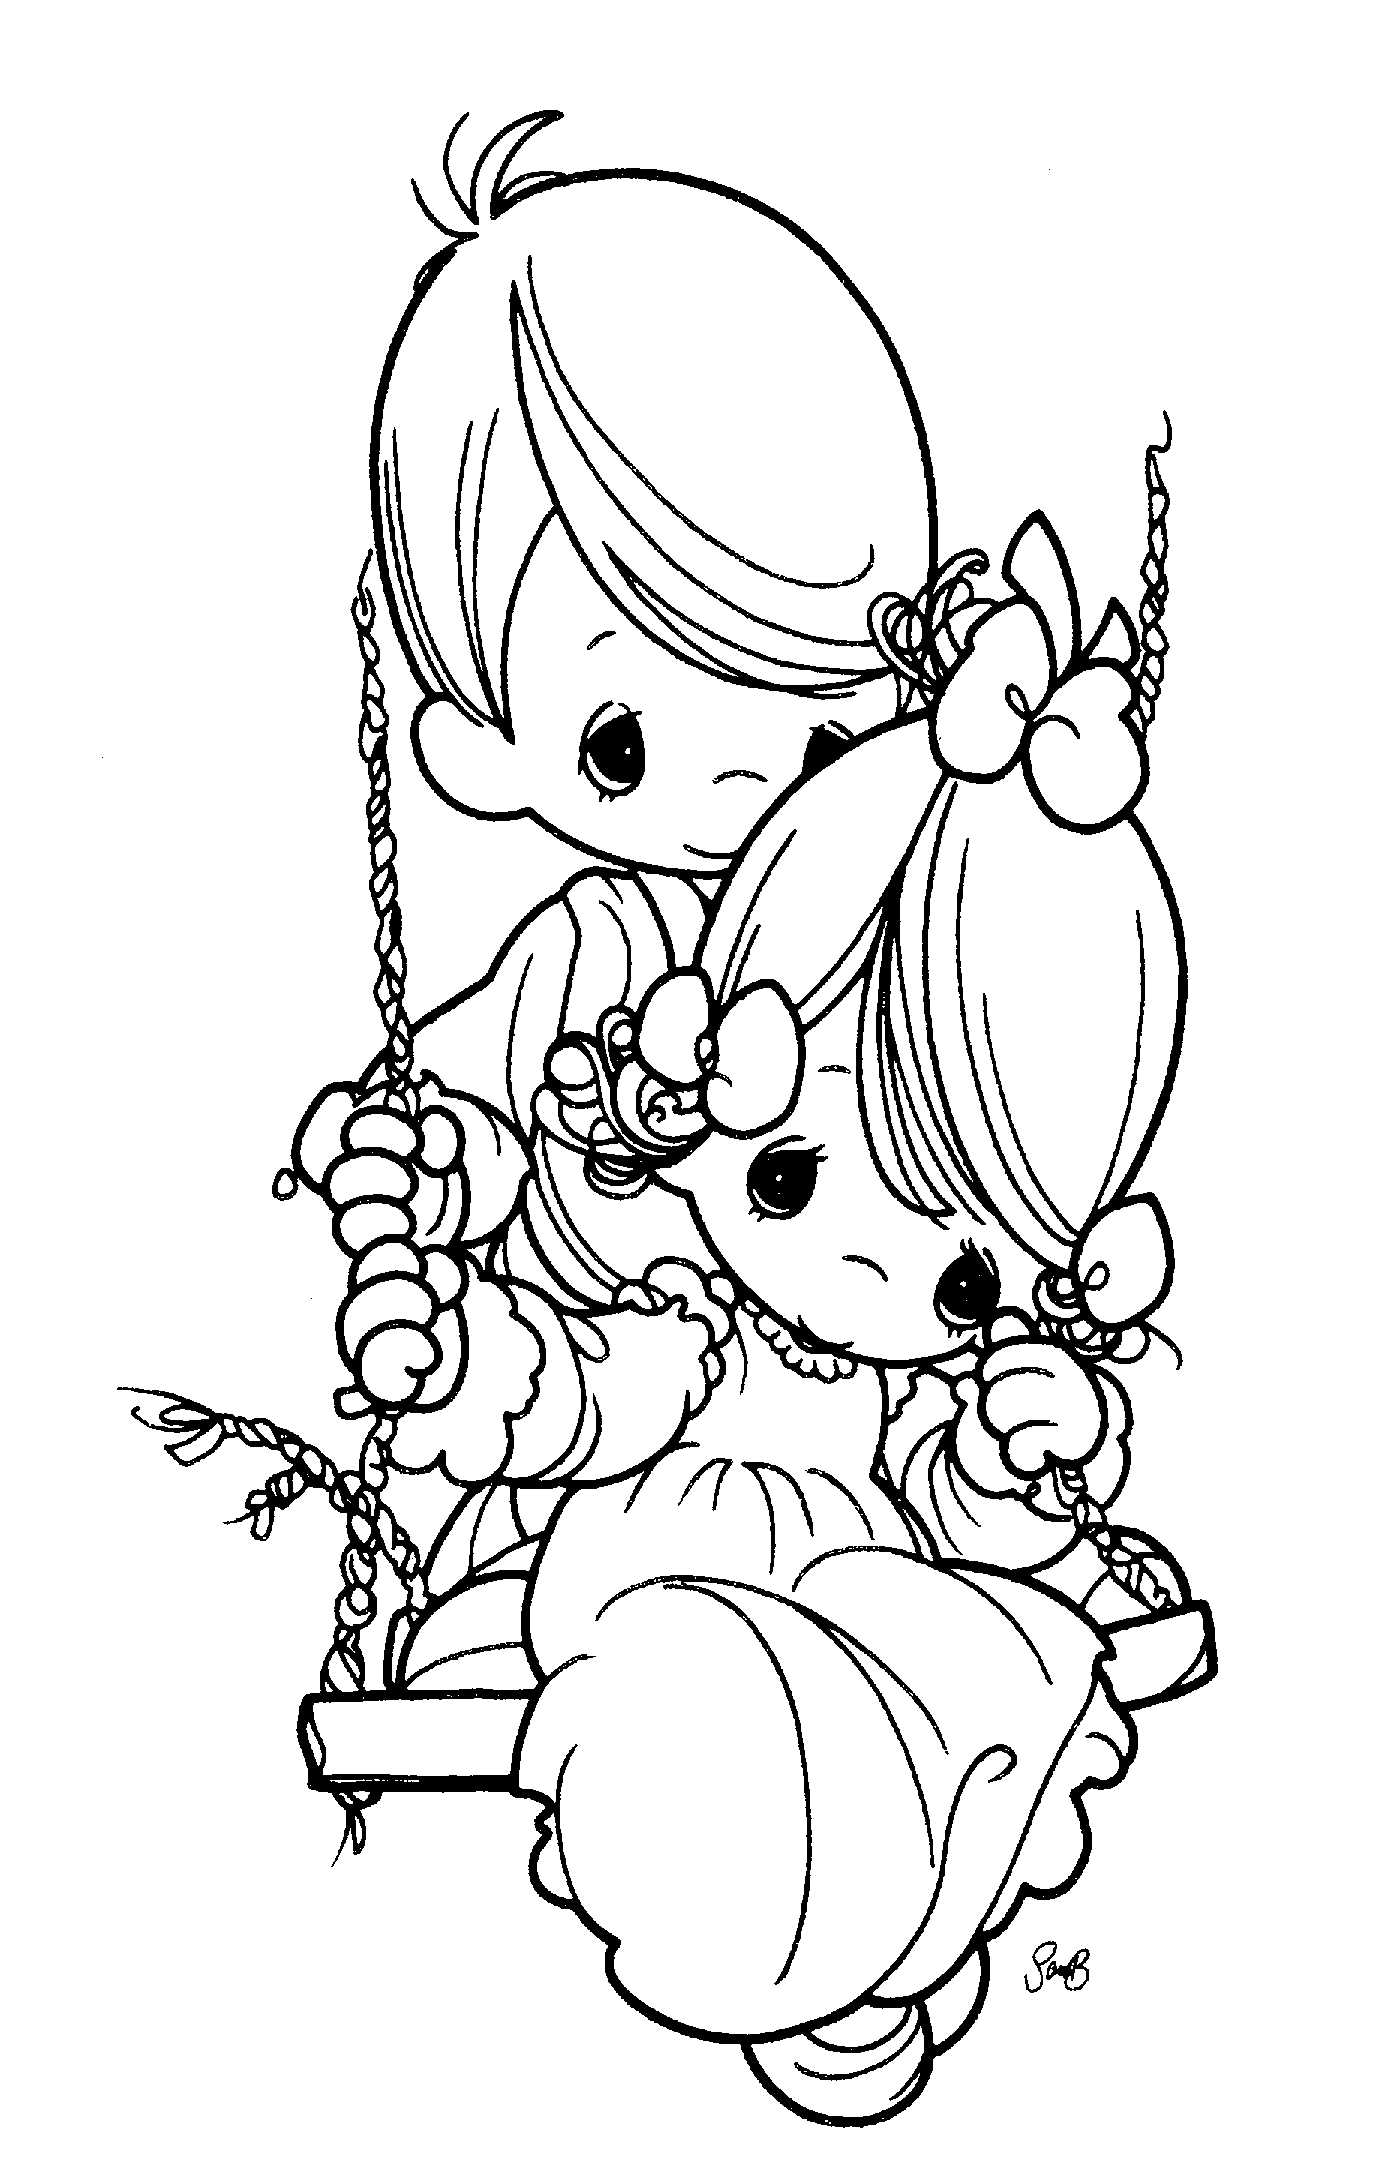 precious moments printable coloring pages precious moments coloring pages getcoloringpagescom coloring precious moments printable pages 